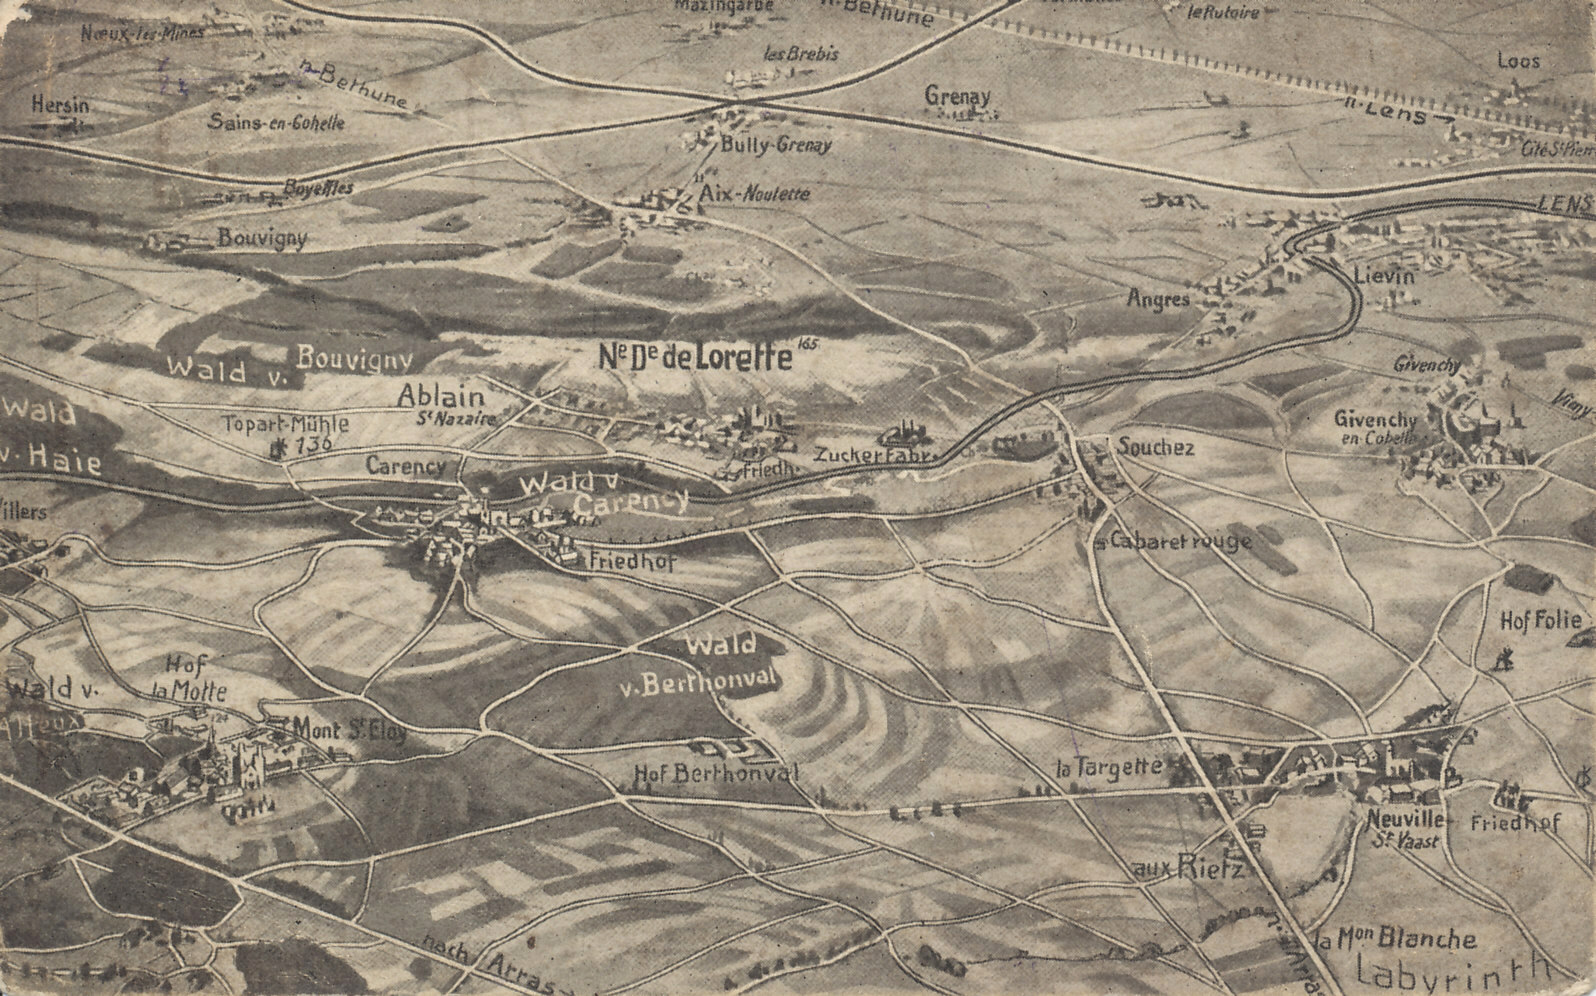 German postcard of some of the battlefield of Artois, site of the First, Second, and Third Battles of Artois (1914 and 1915), the Battle of Loos (1915), and the Battle of Vimy Ridge (1917). Loos is in the upper right, the road to Vimy on the center right. The world's largest French military cemetery is on the heights of Notre-Dame-de-Lorette.